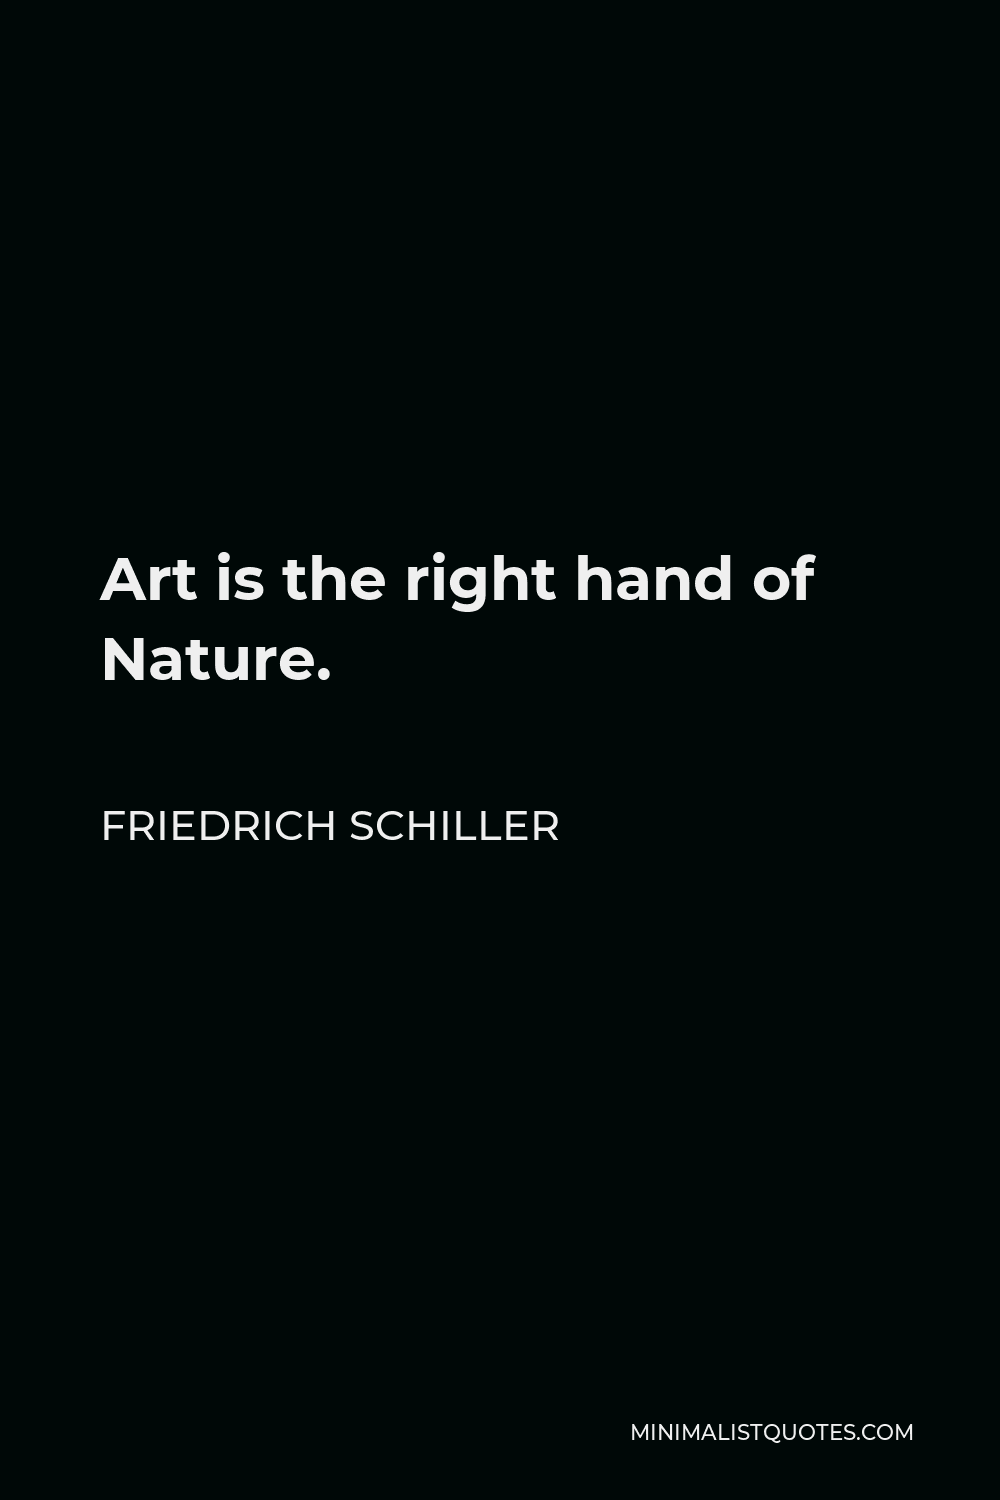 Friedrich Schiller Quote - Art is the right hand of Nature.